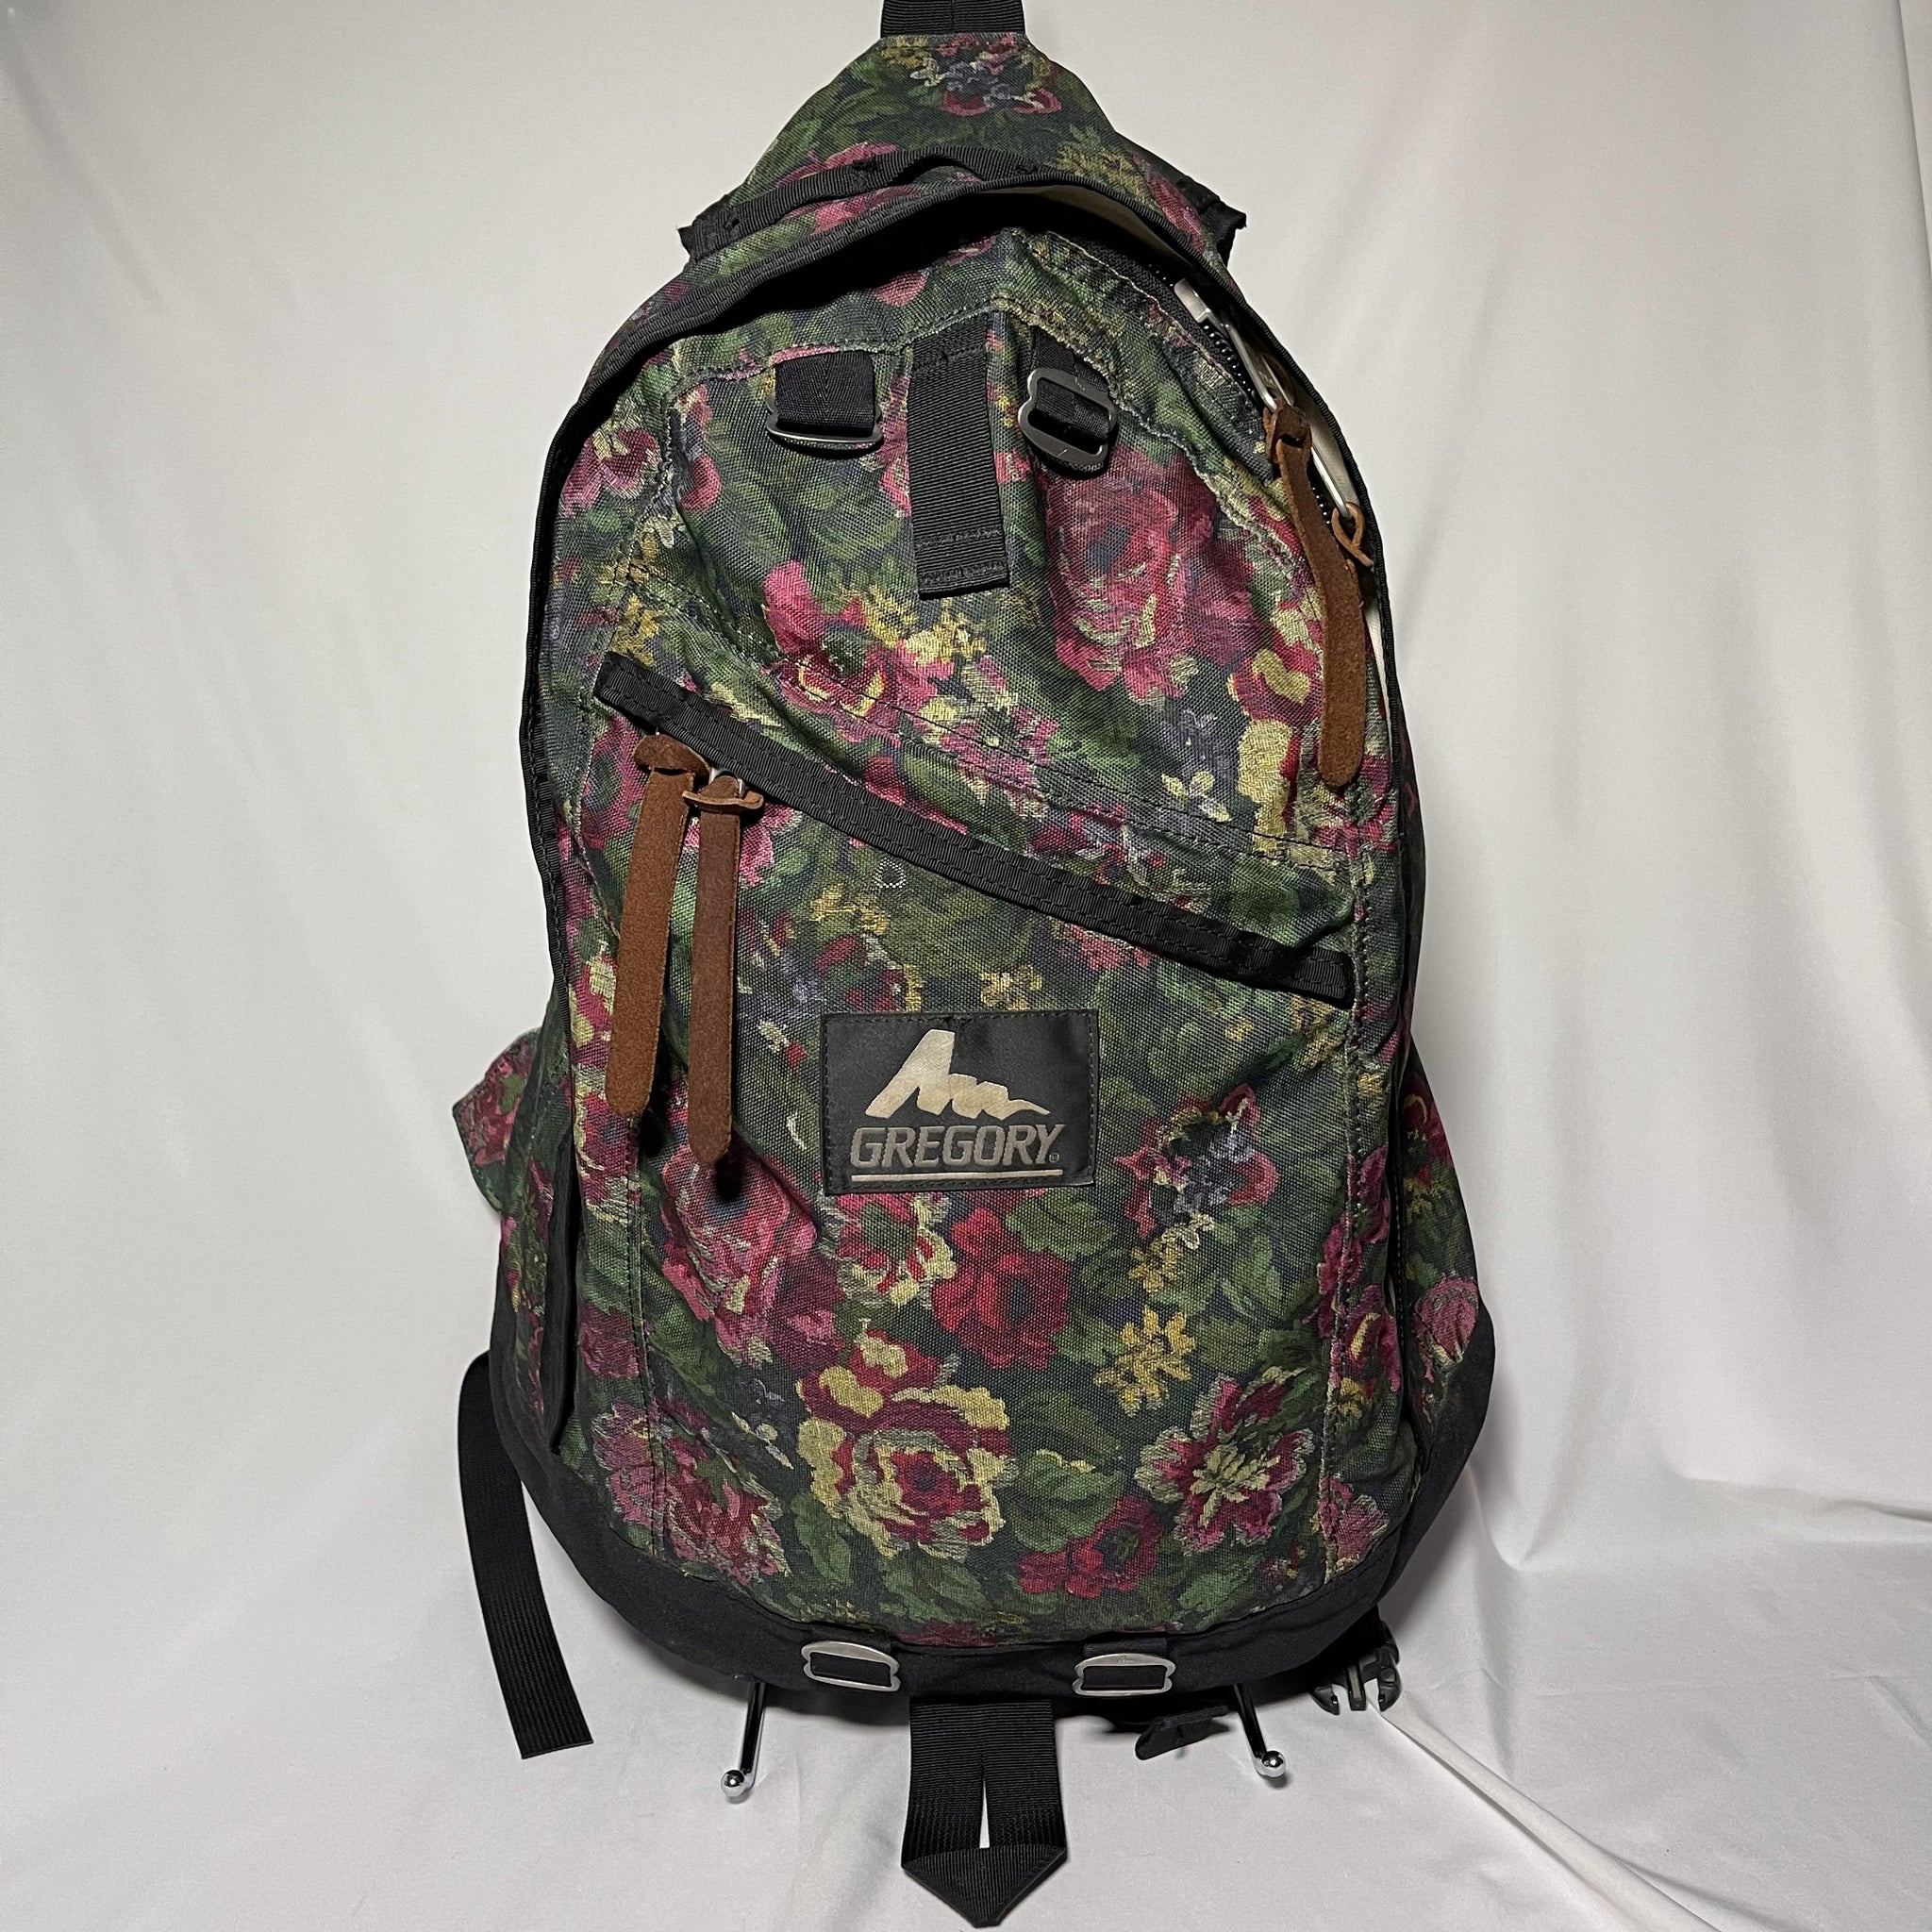 Gregory Daypack 26L - Garden Tapestry 紅綠花 紅花 pattern 背囊 made in USA